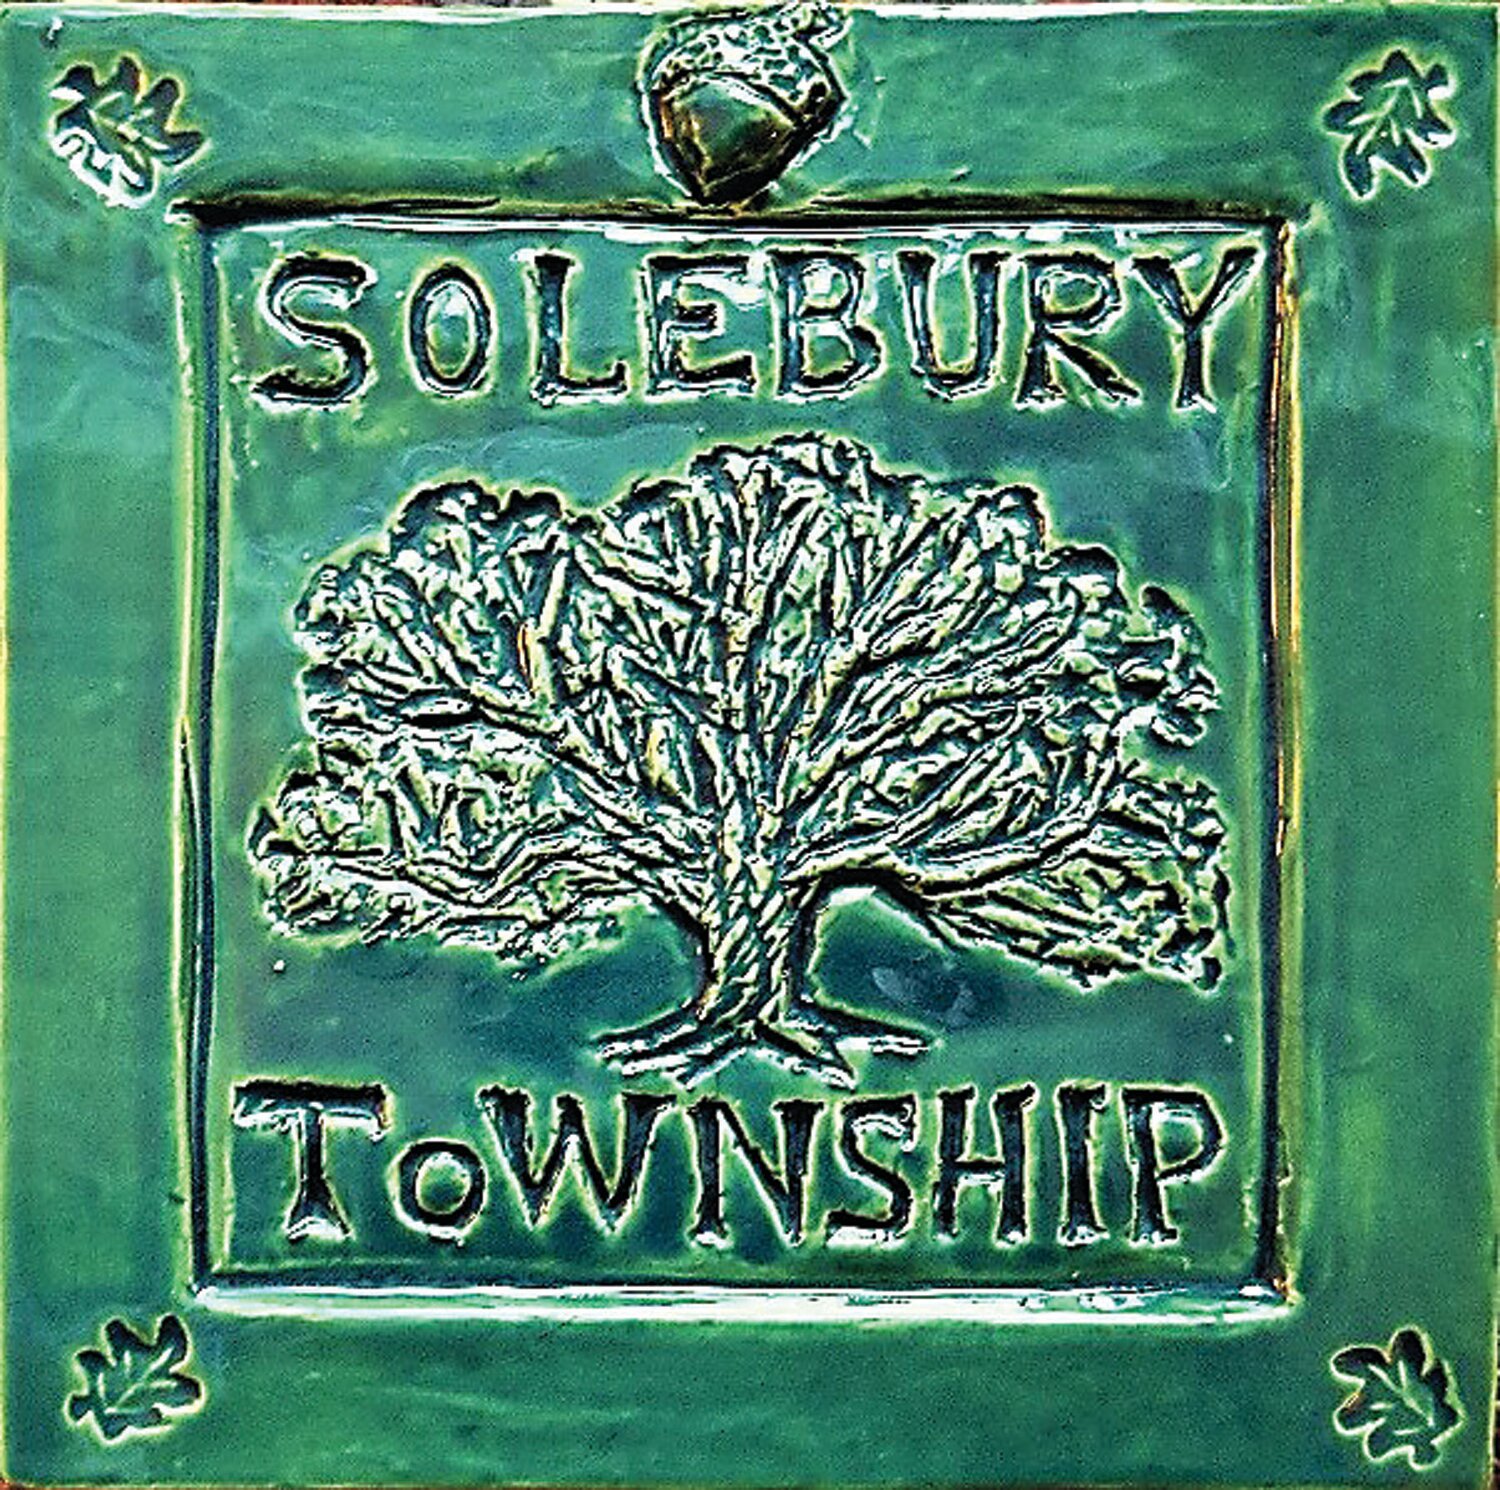 Columbus Oak Tree Tiles were individually hand-crafted and produced by artist Karen Singer.